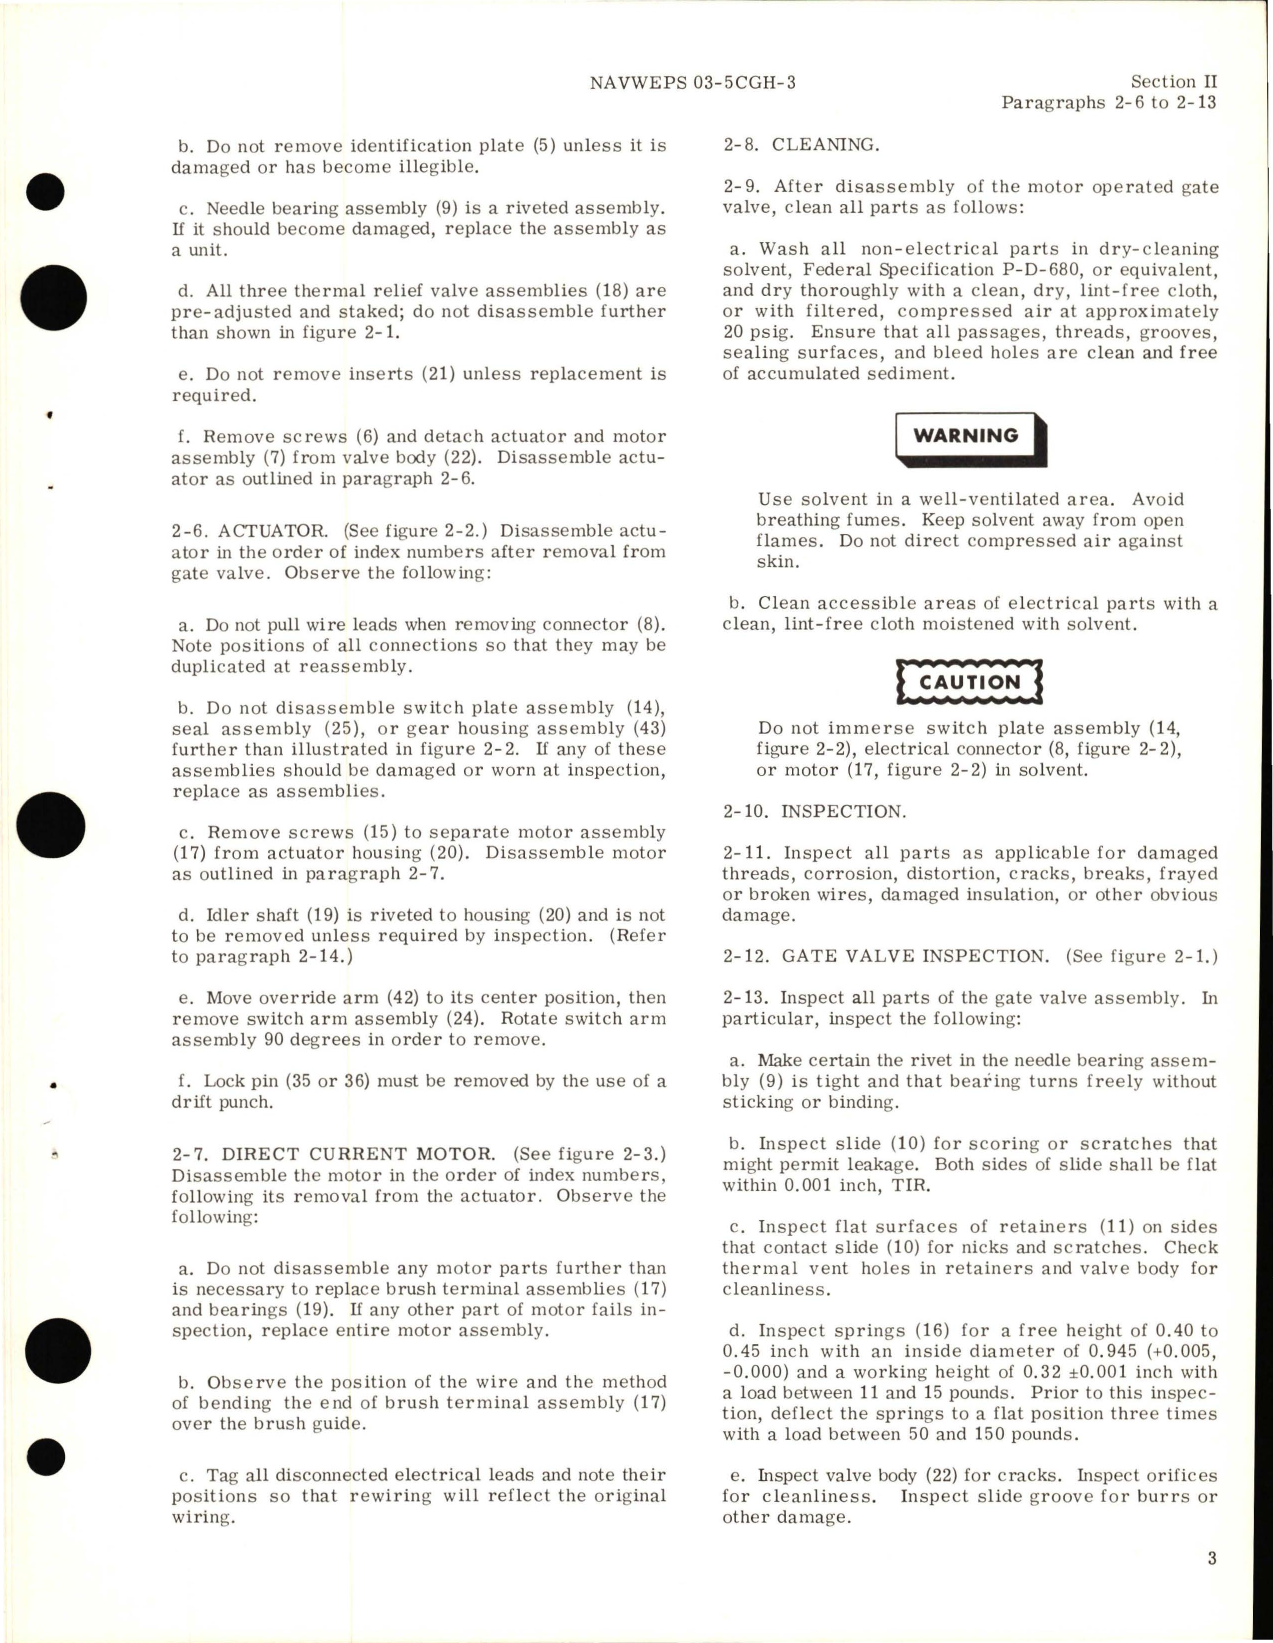 Sample page 7 from AirCorps Library document: Overhaul Instructions for Motor Operated Gate Valve - Part AV16B1658D 